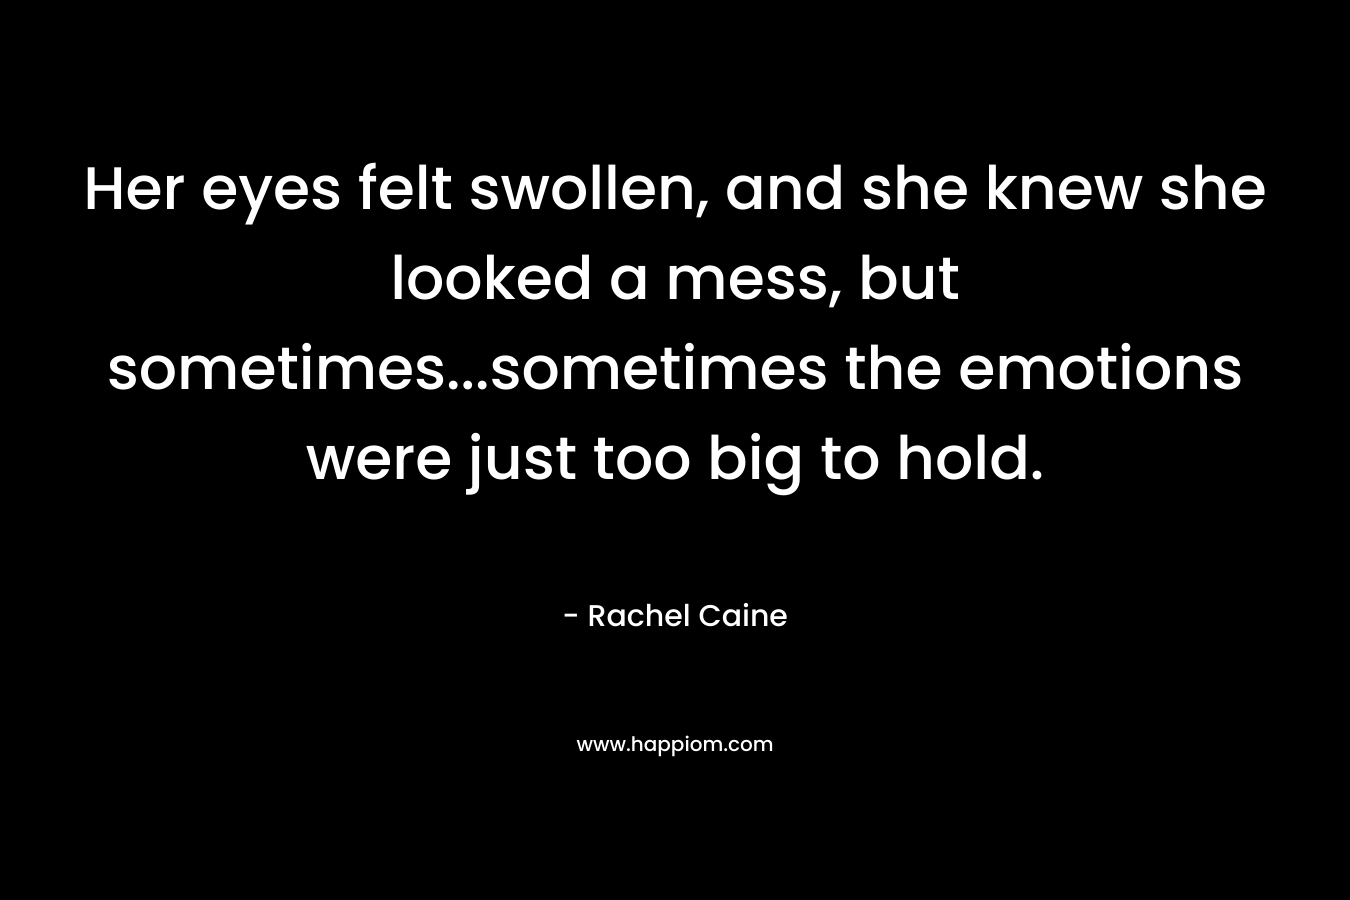 Her eyes felt swollen, and she knew she looked a mess, but sometimes…sometimes the emotions were just too big to hold. – Rachel Caine